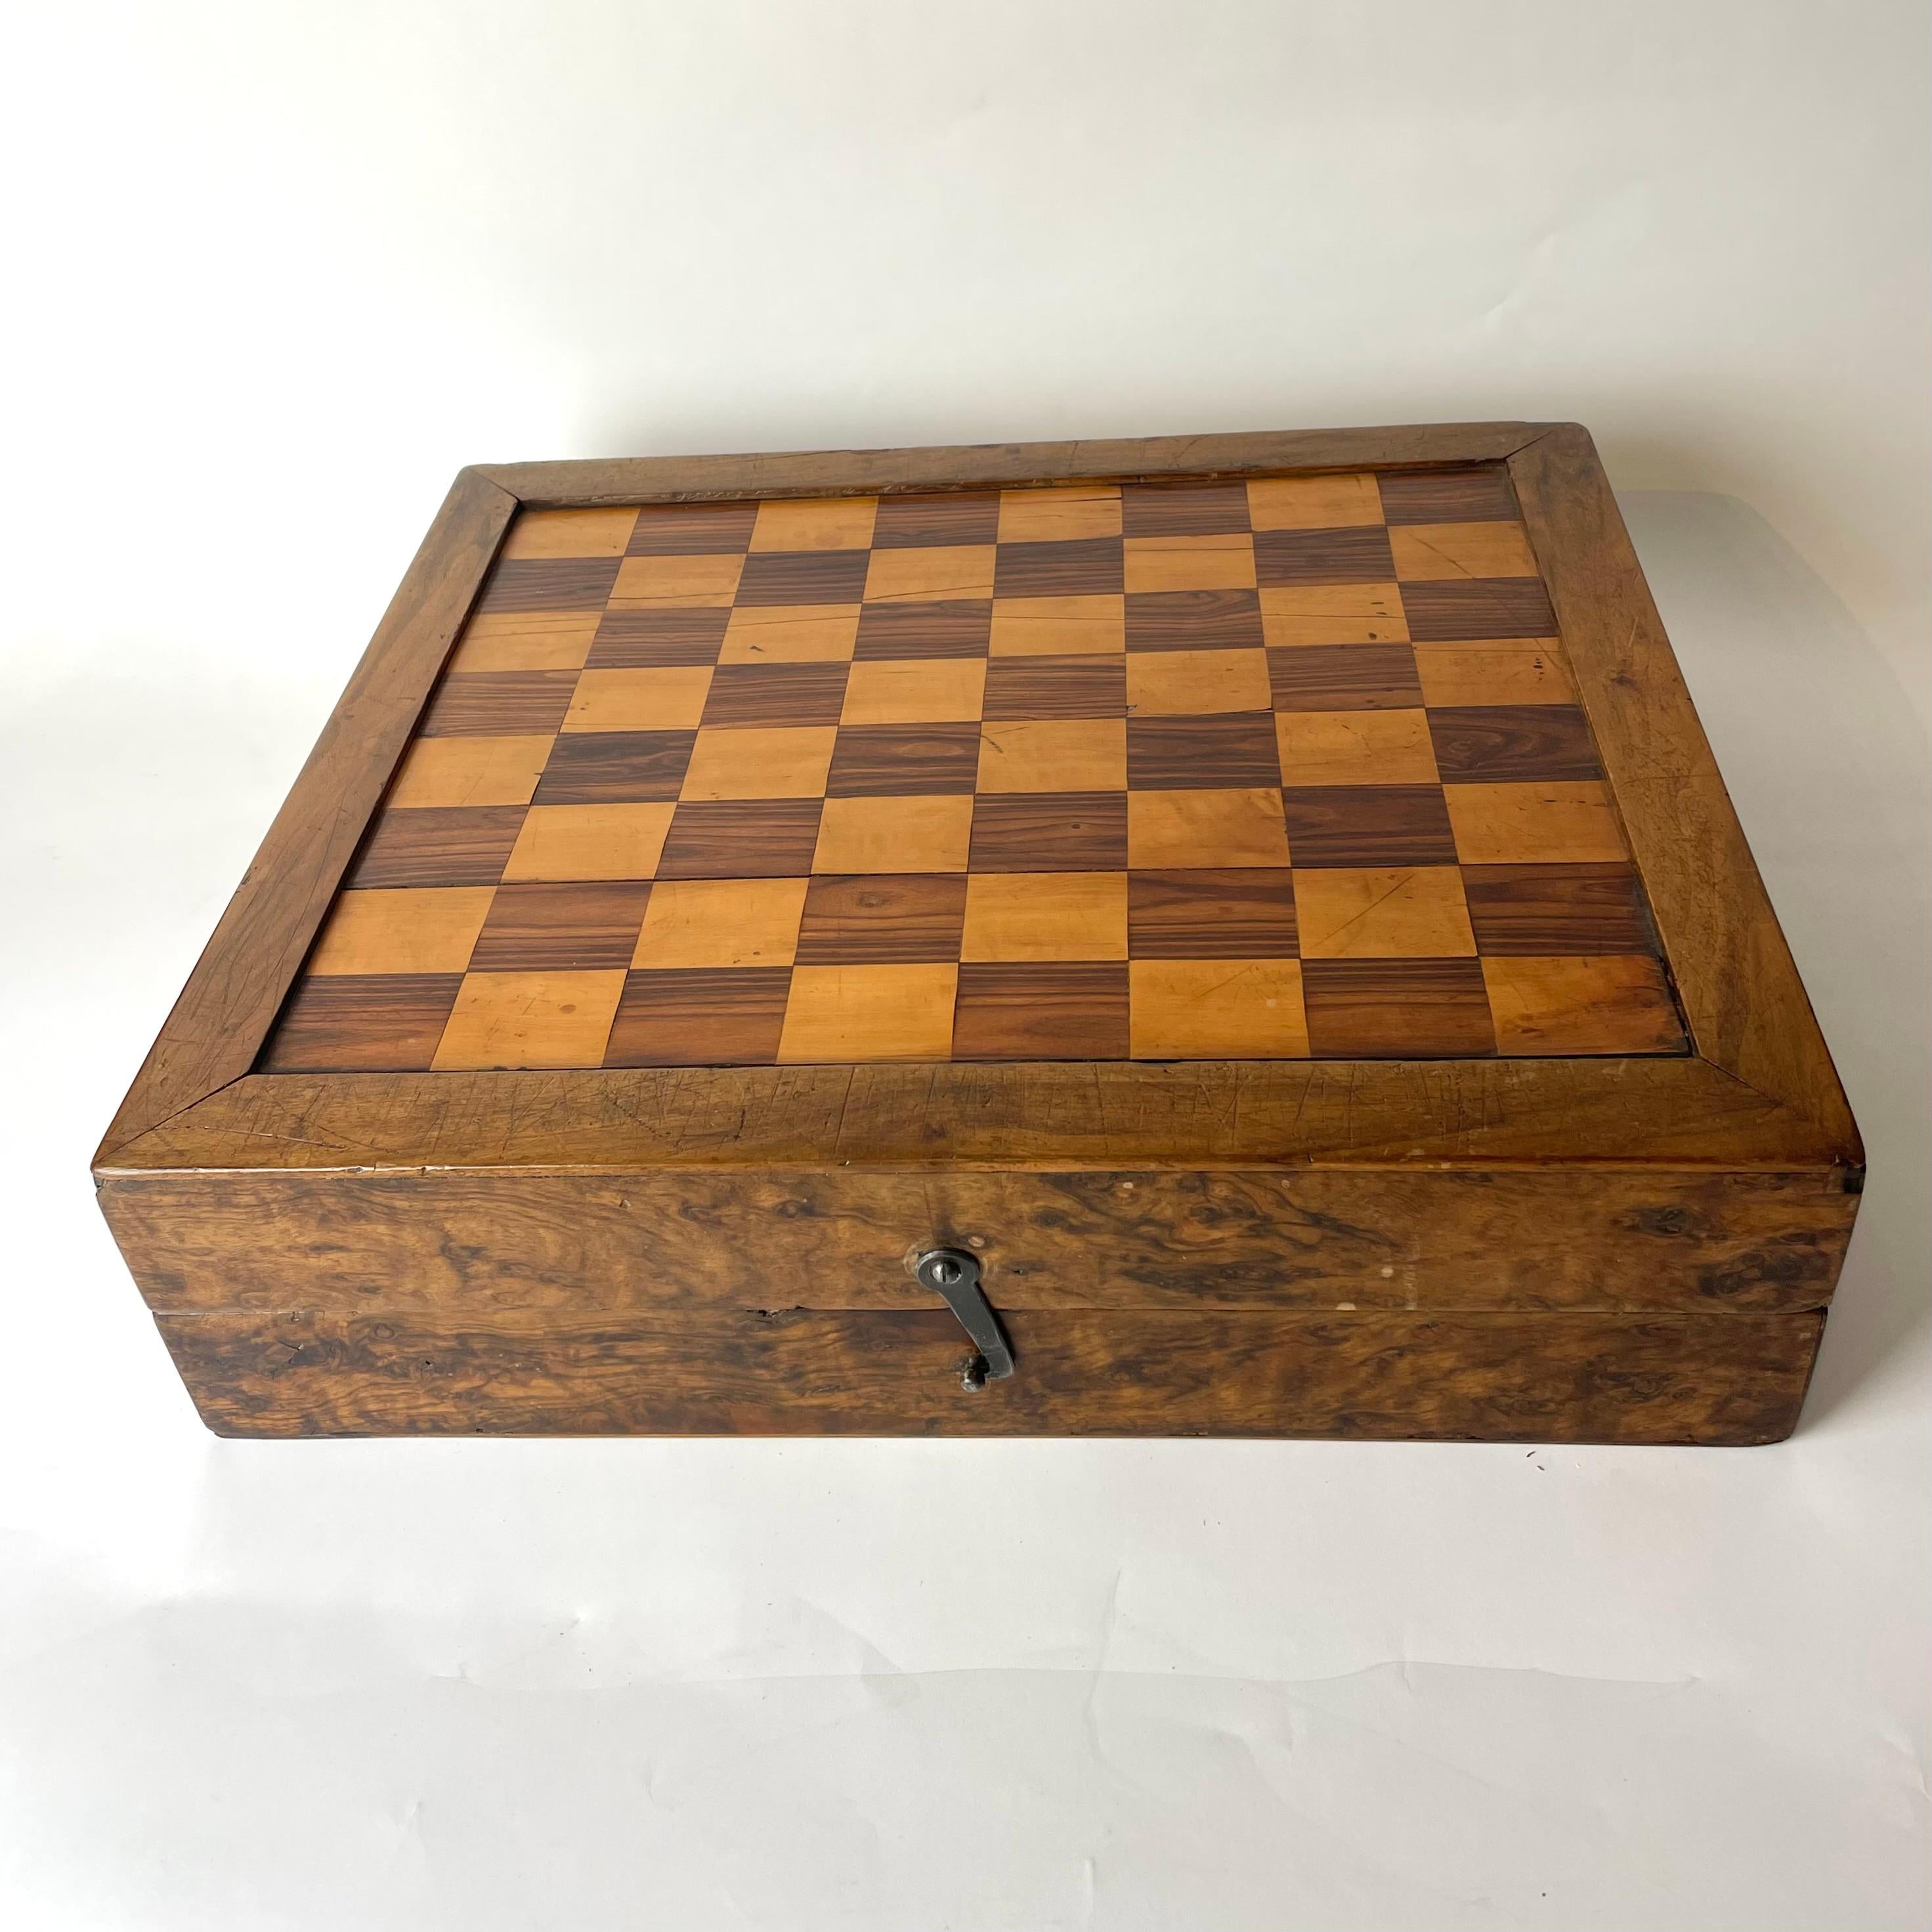 European Late Baroque Games Box Chess Backgammon Decorated with Rich Wooden Interior.   For Sale